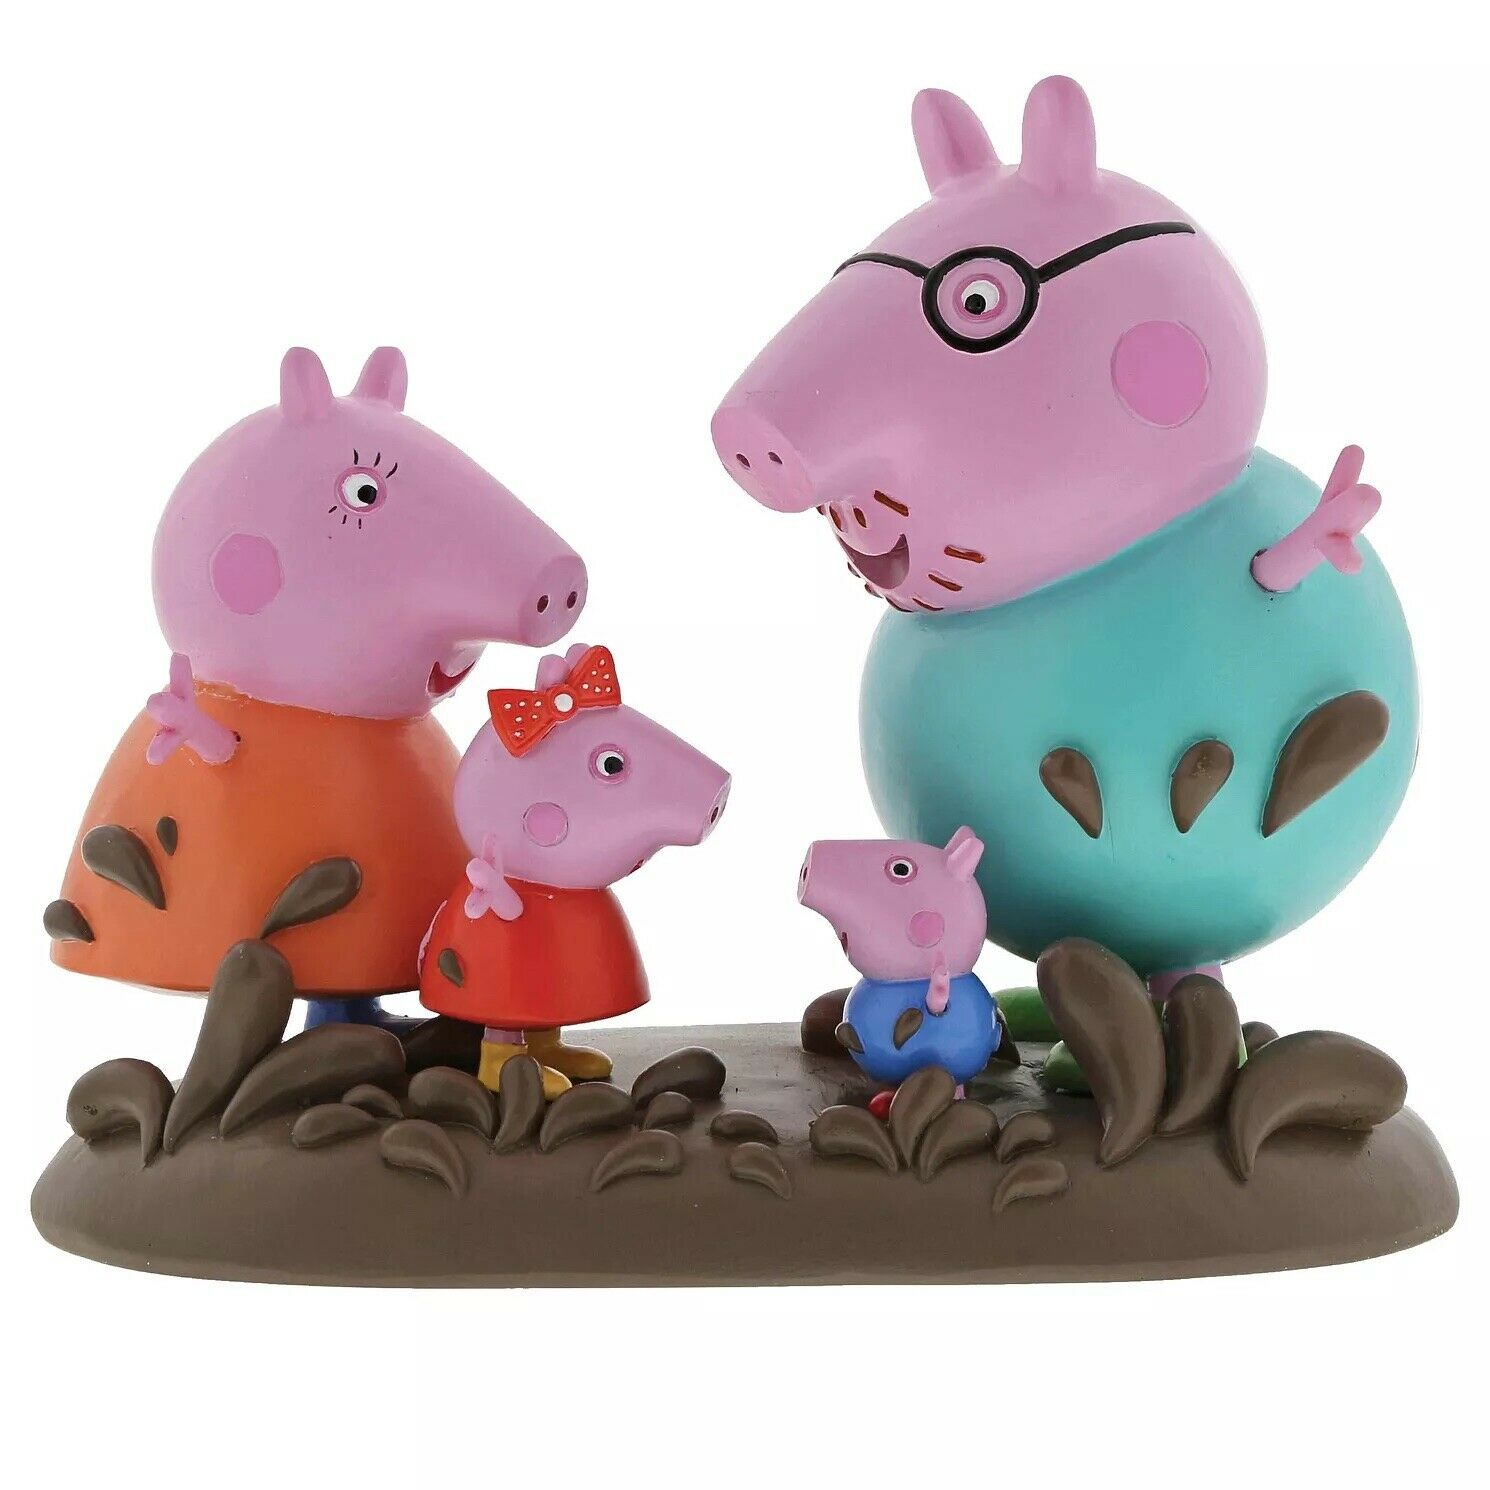 PEPPA PIG LIMITED EDITION FAMILY FIGURINE A29666